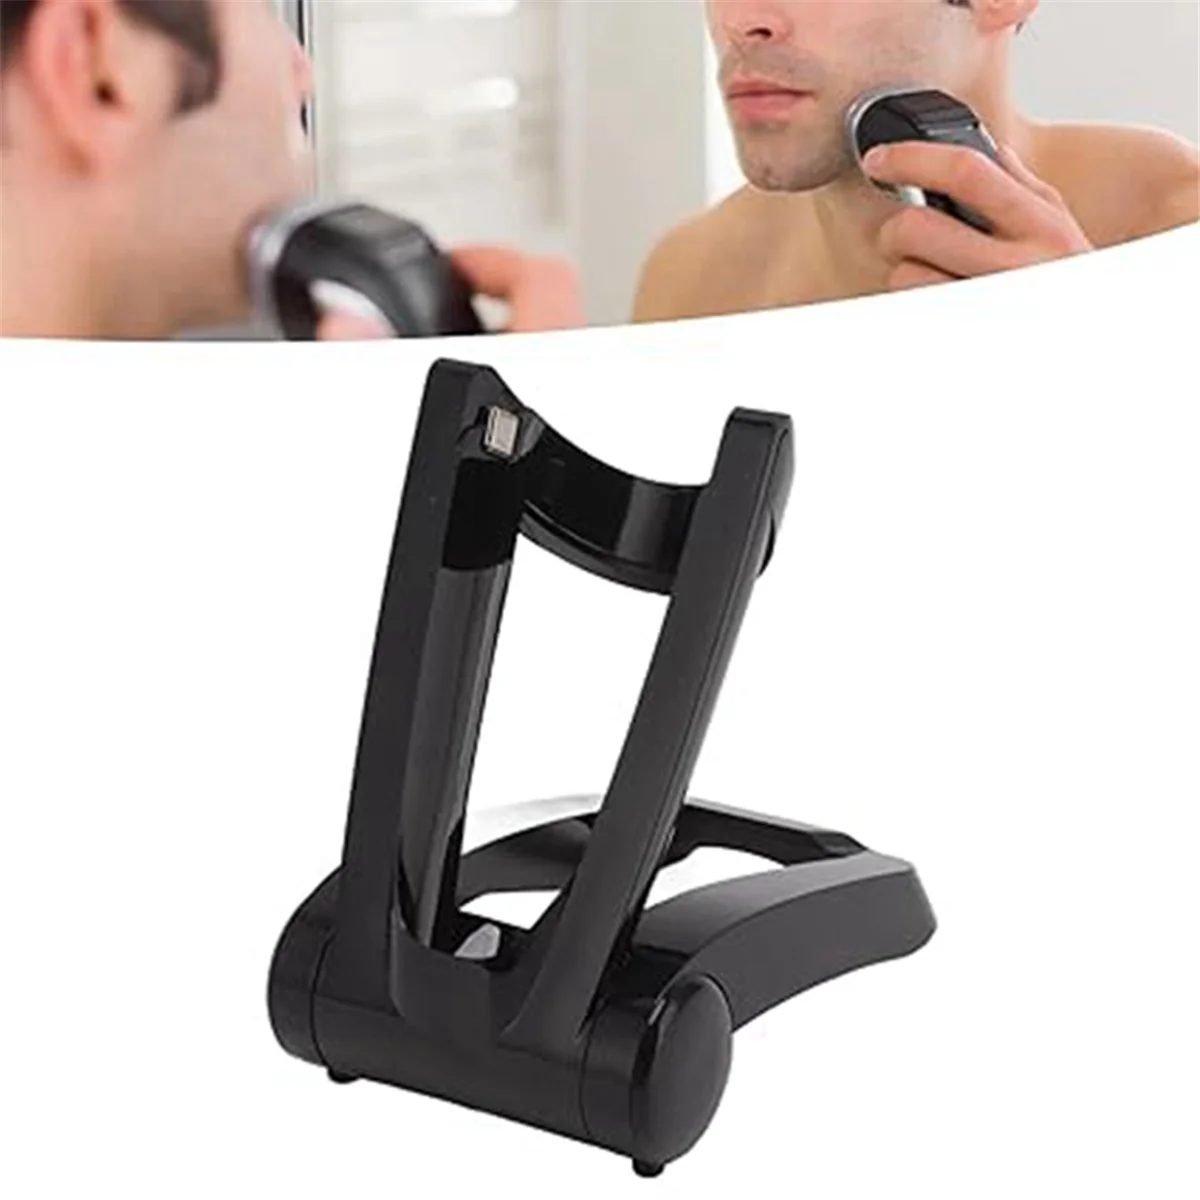 Suitable for Philips Shaver RQ12 Charger Base RQ1251/1250/1280/1260 Accessories Shaver Foldable Stand 1 Pack